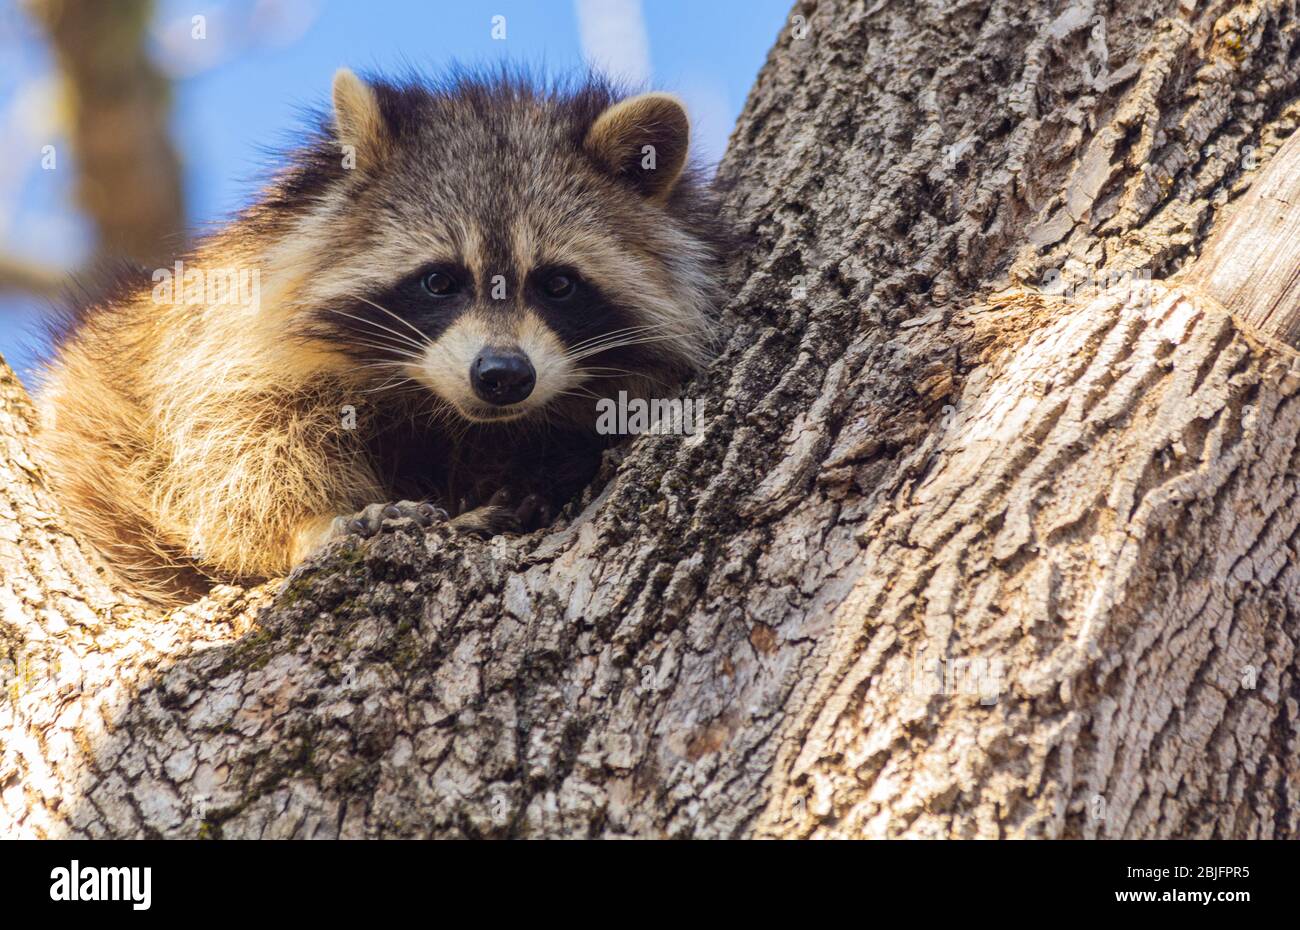 Closeup of a young raccoon in the branch of a tree. Stock Photo